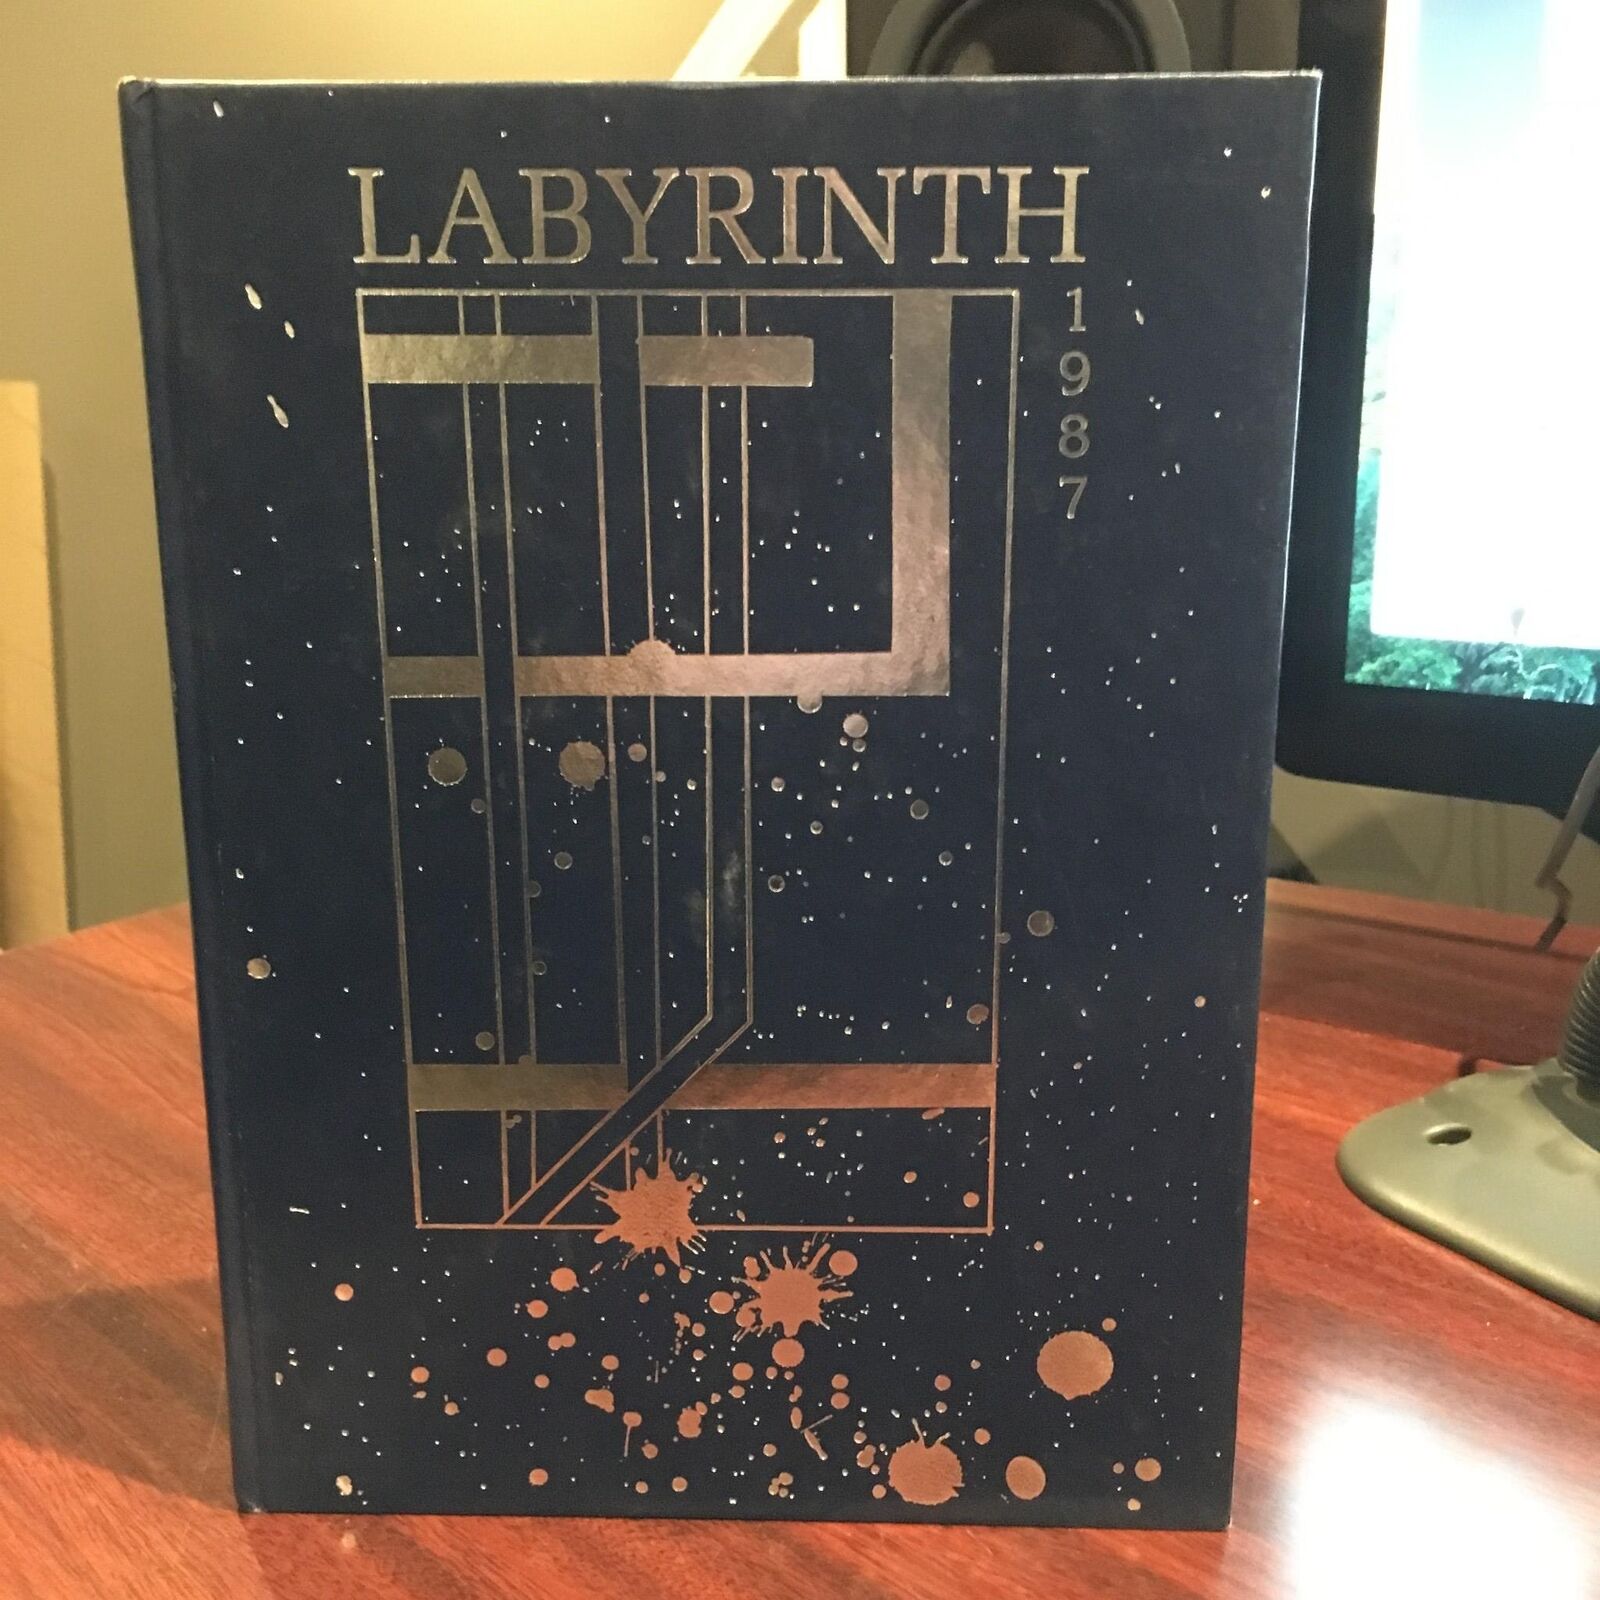 1987 Newport Mills Middle School Yearbook- Kensington, MD - Labyrinth